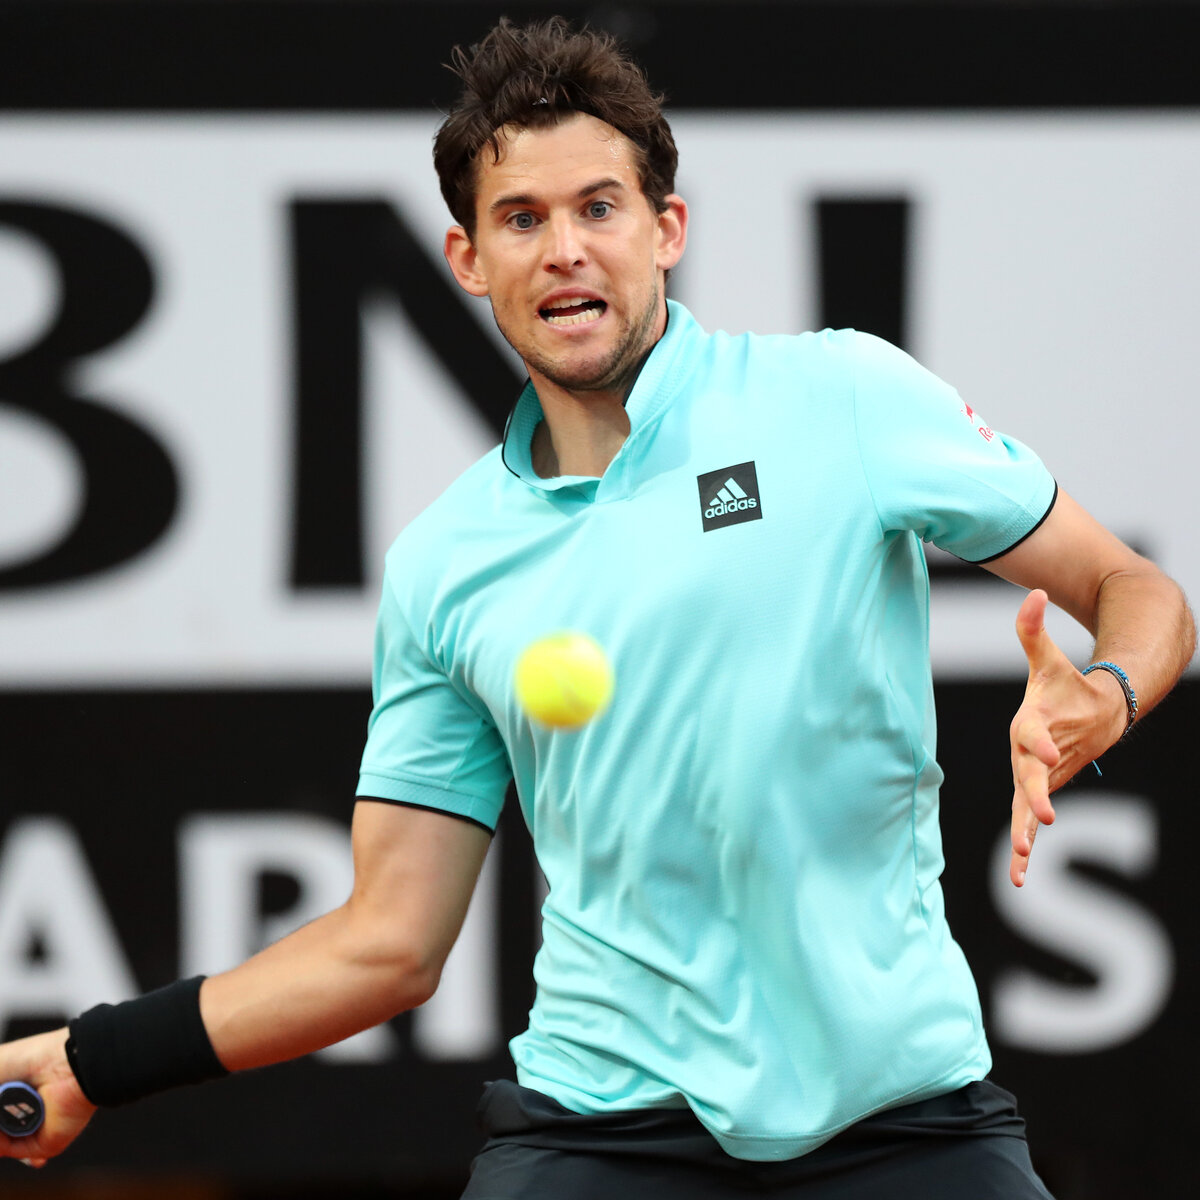 Dominic Thiem More inside, more spin